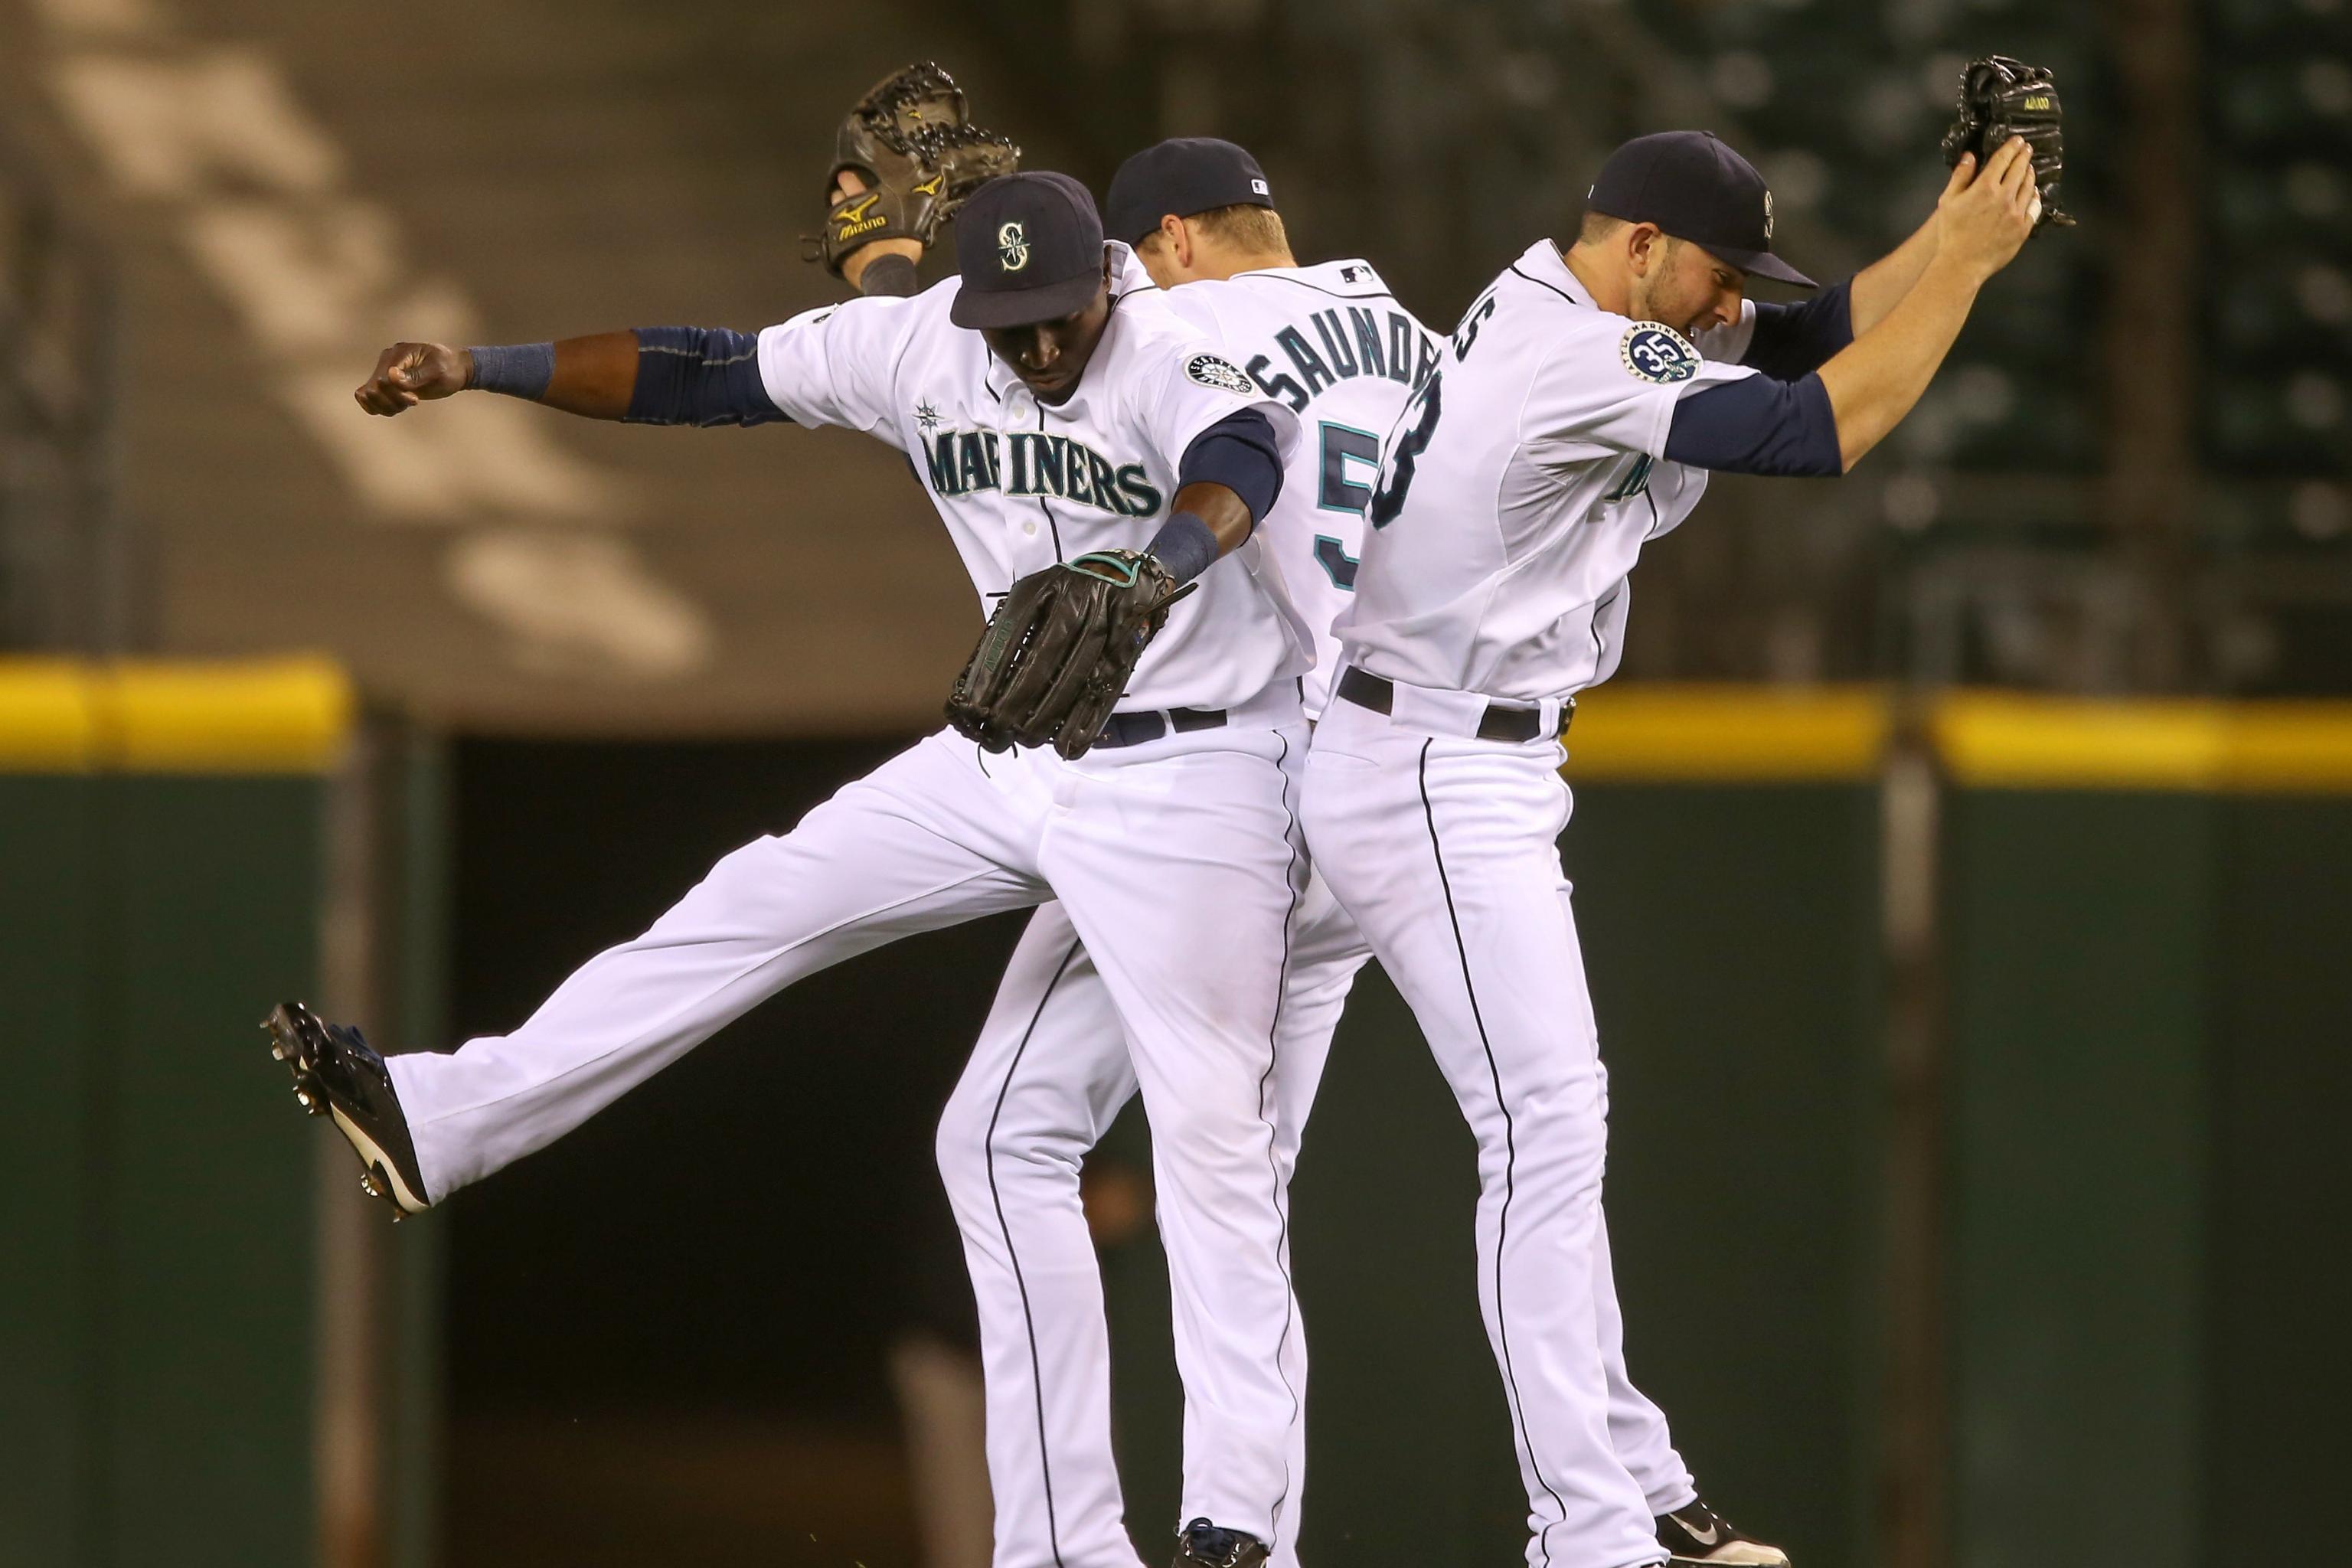 VIDEO: Mariners fan pushes kid out of the way to catch Kyle Seager